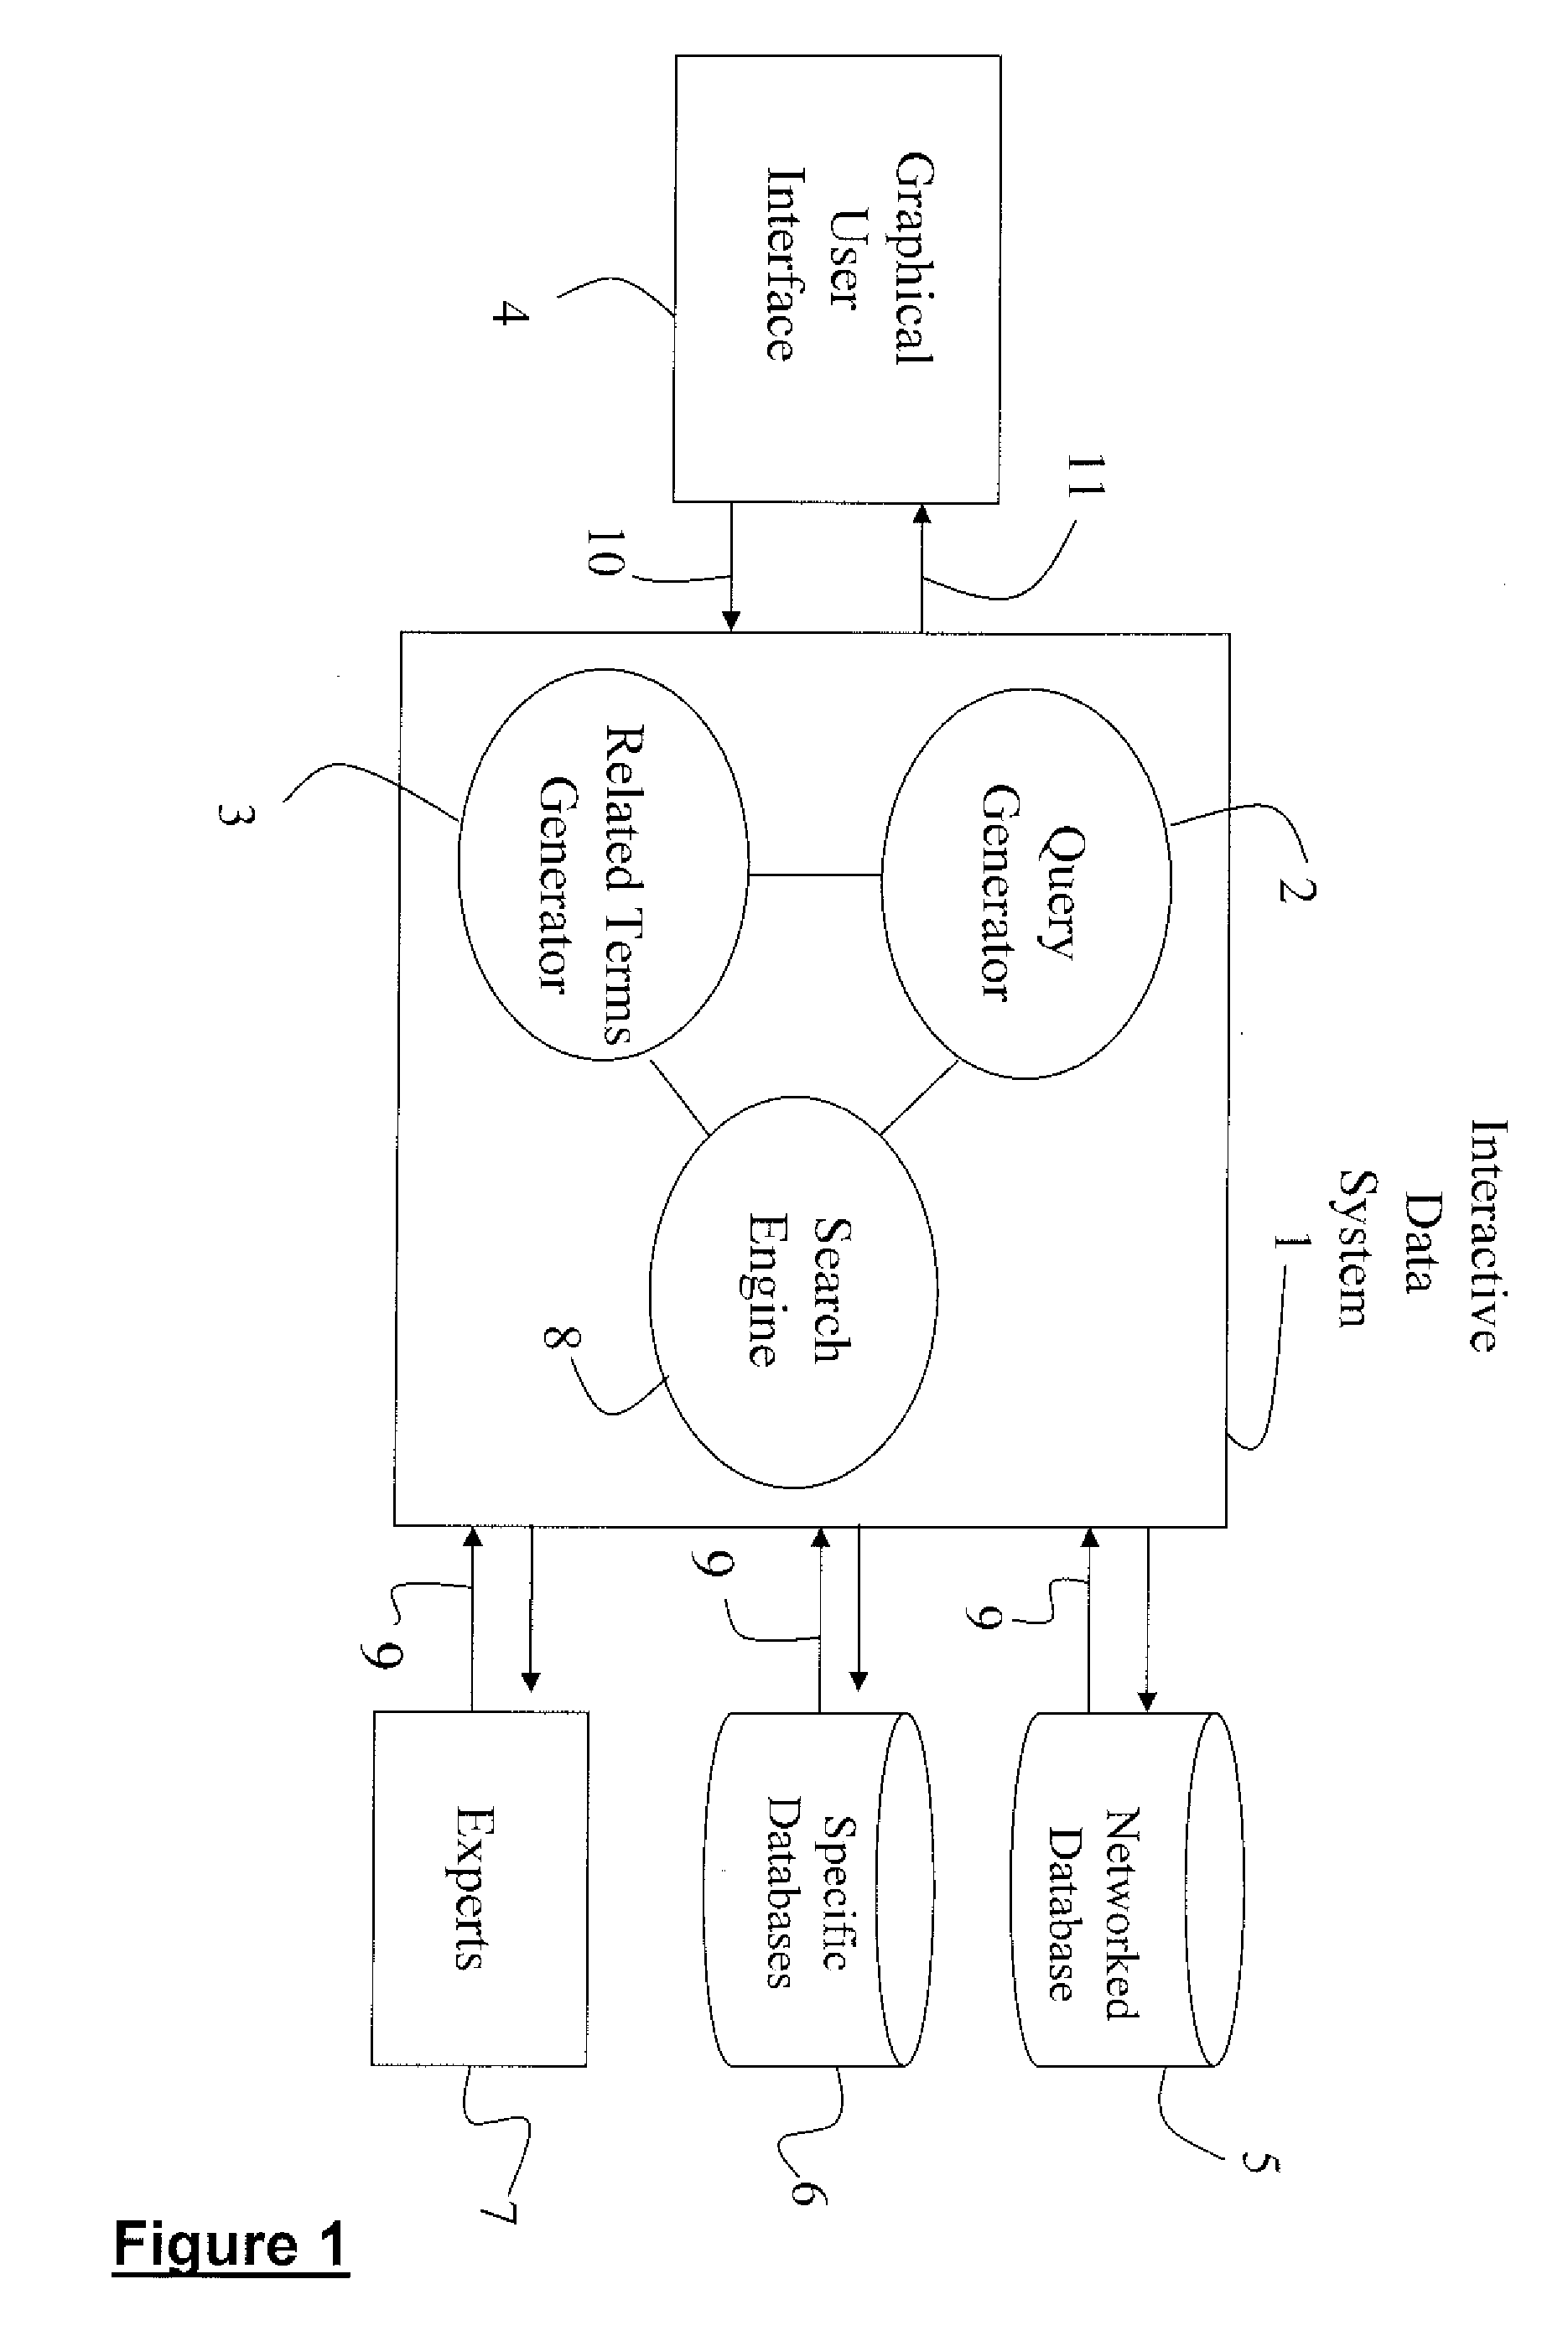 System for facilitating search over a network